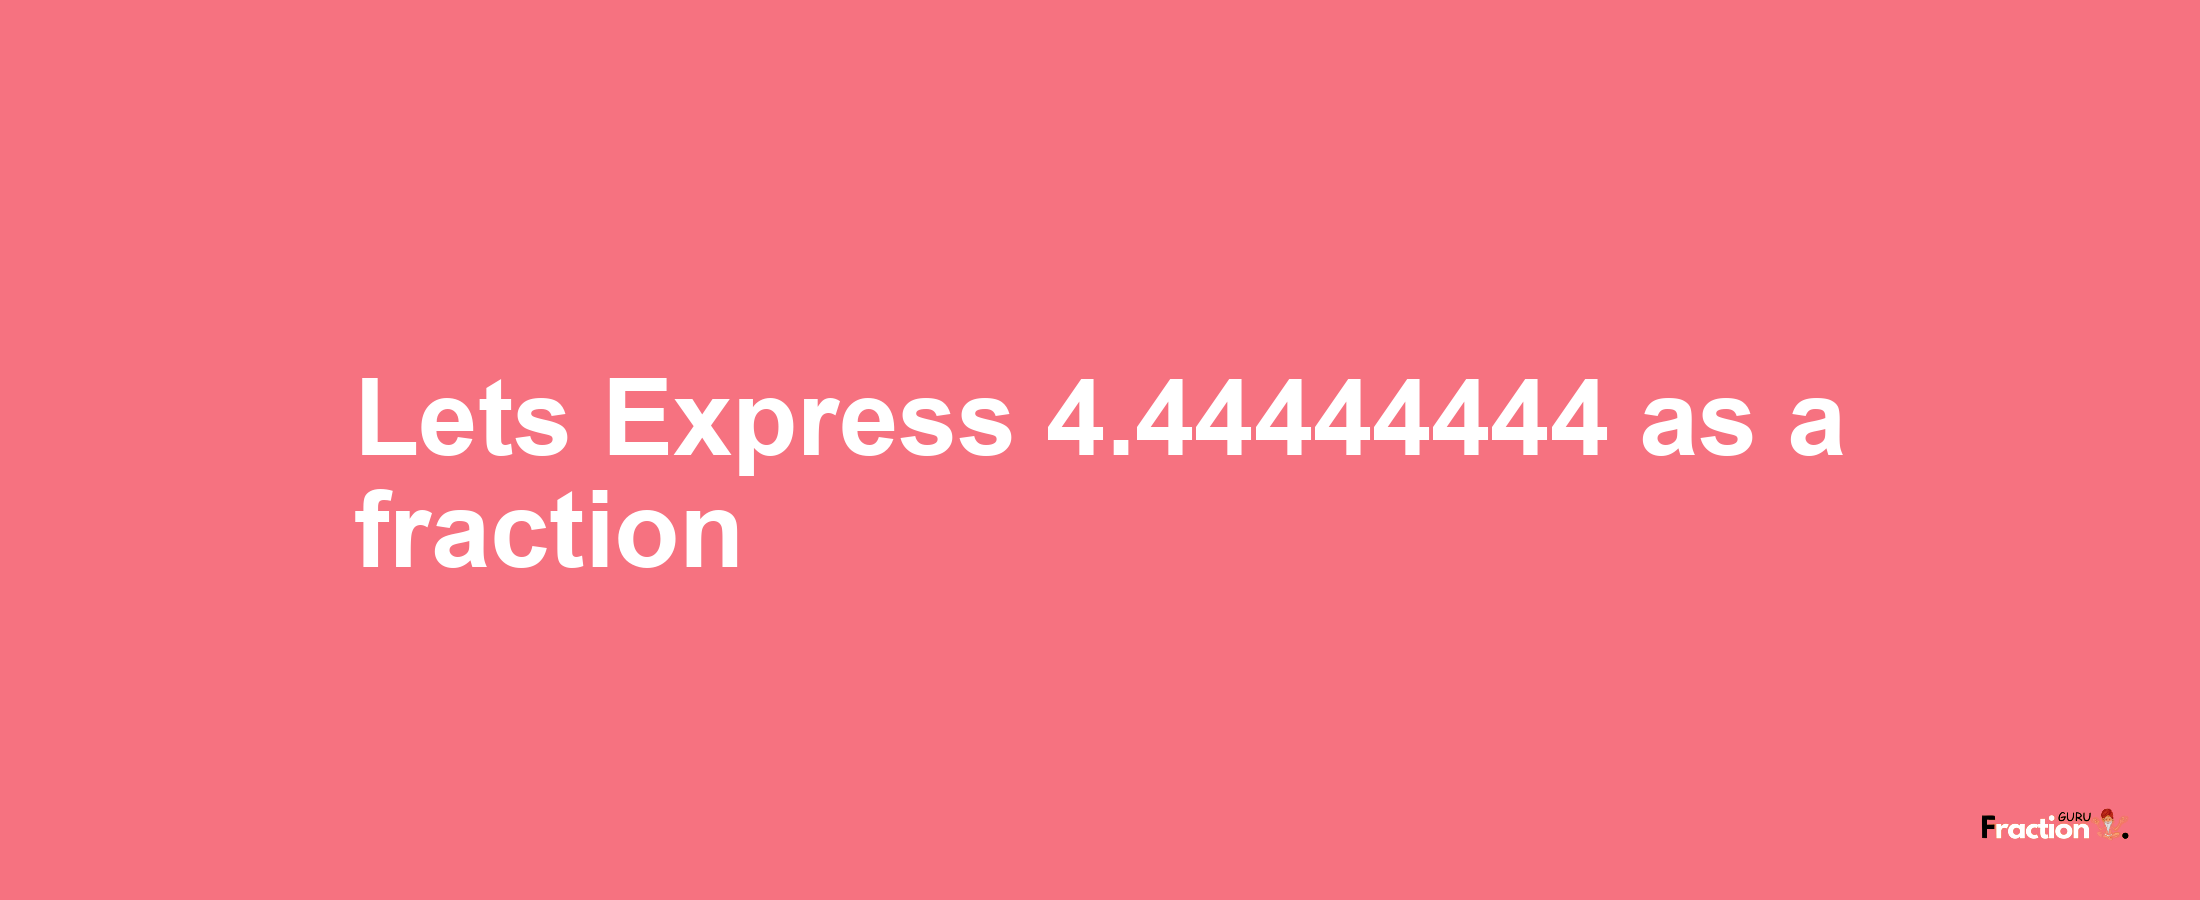 Lets Express 4.44444444 as afraction